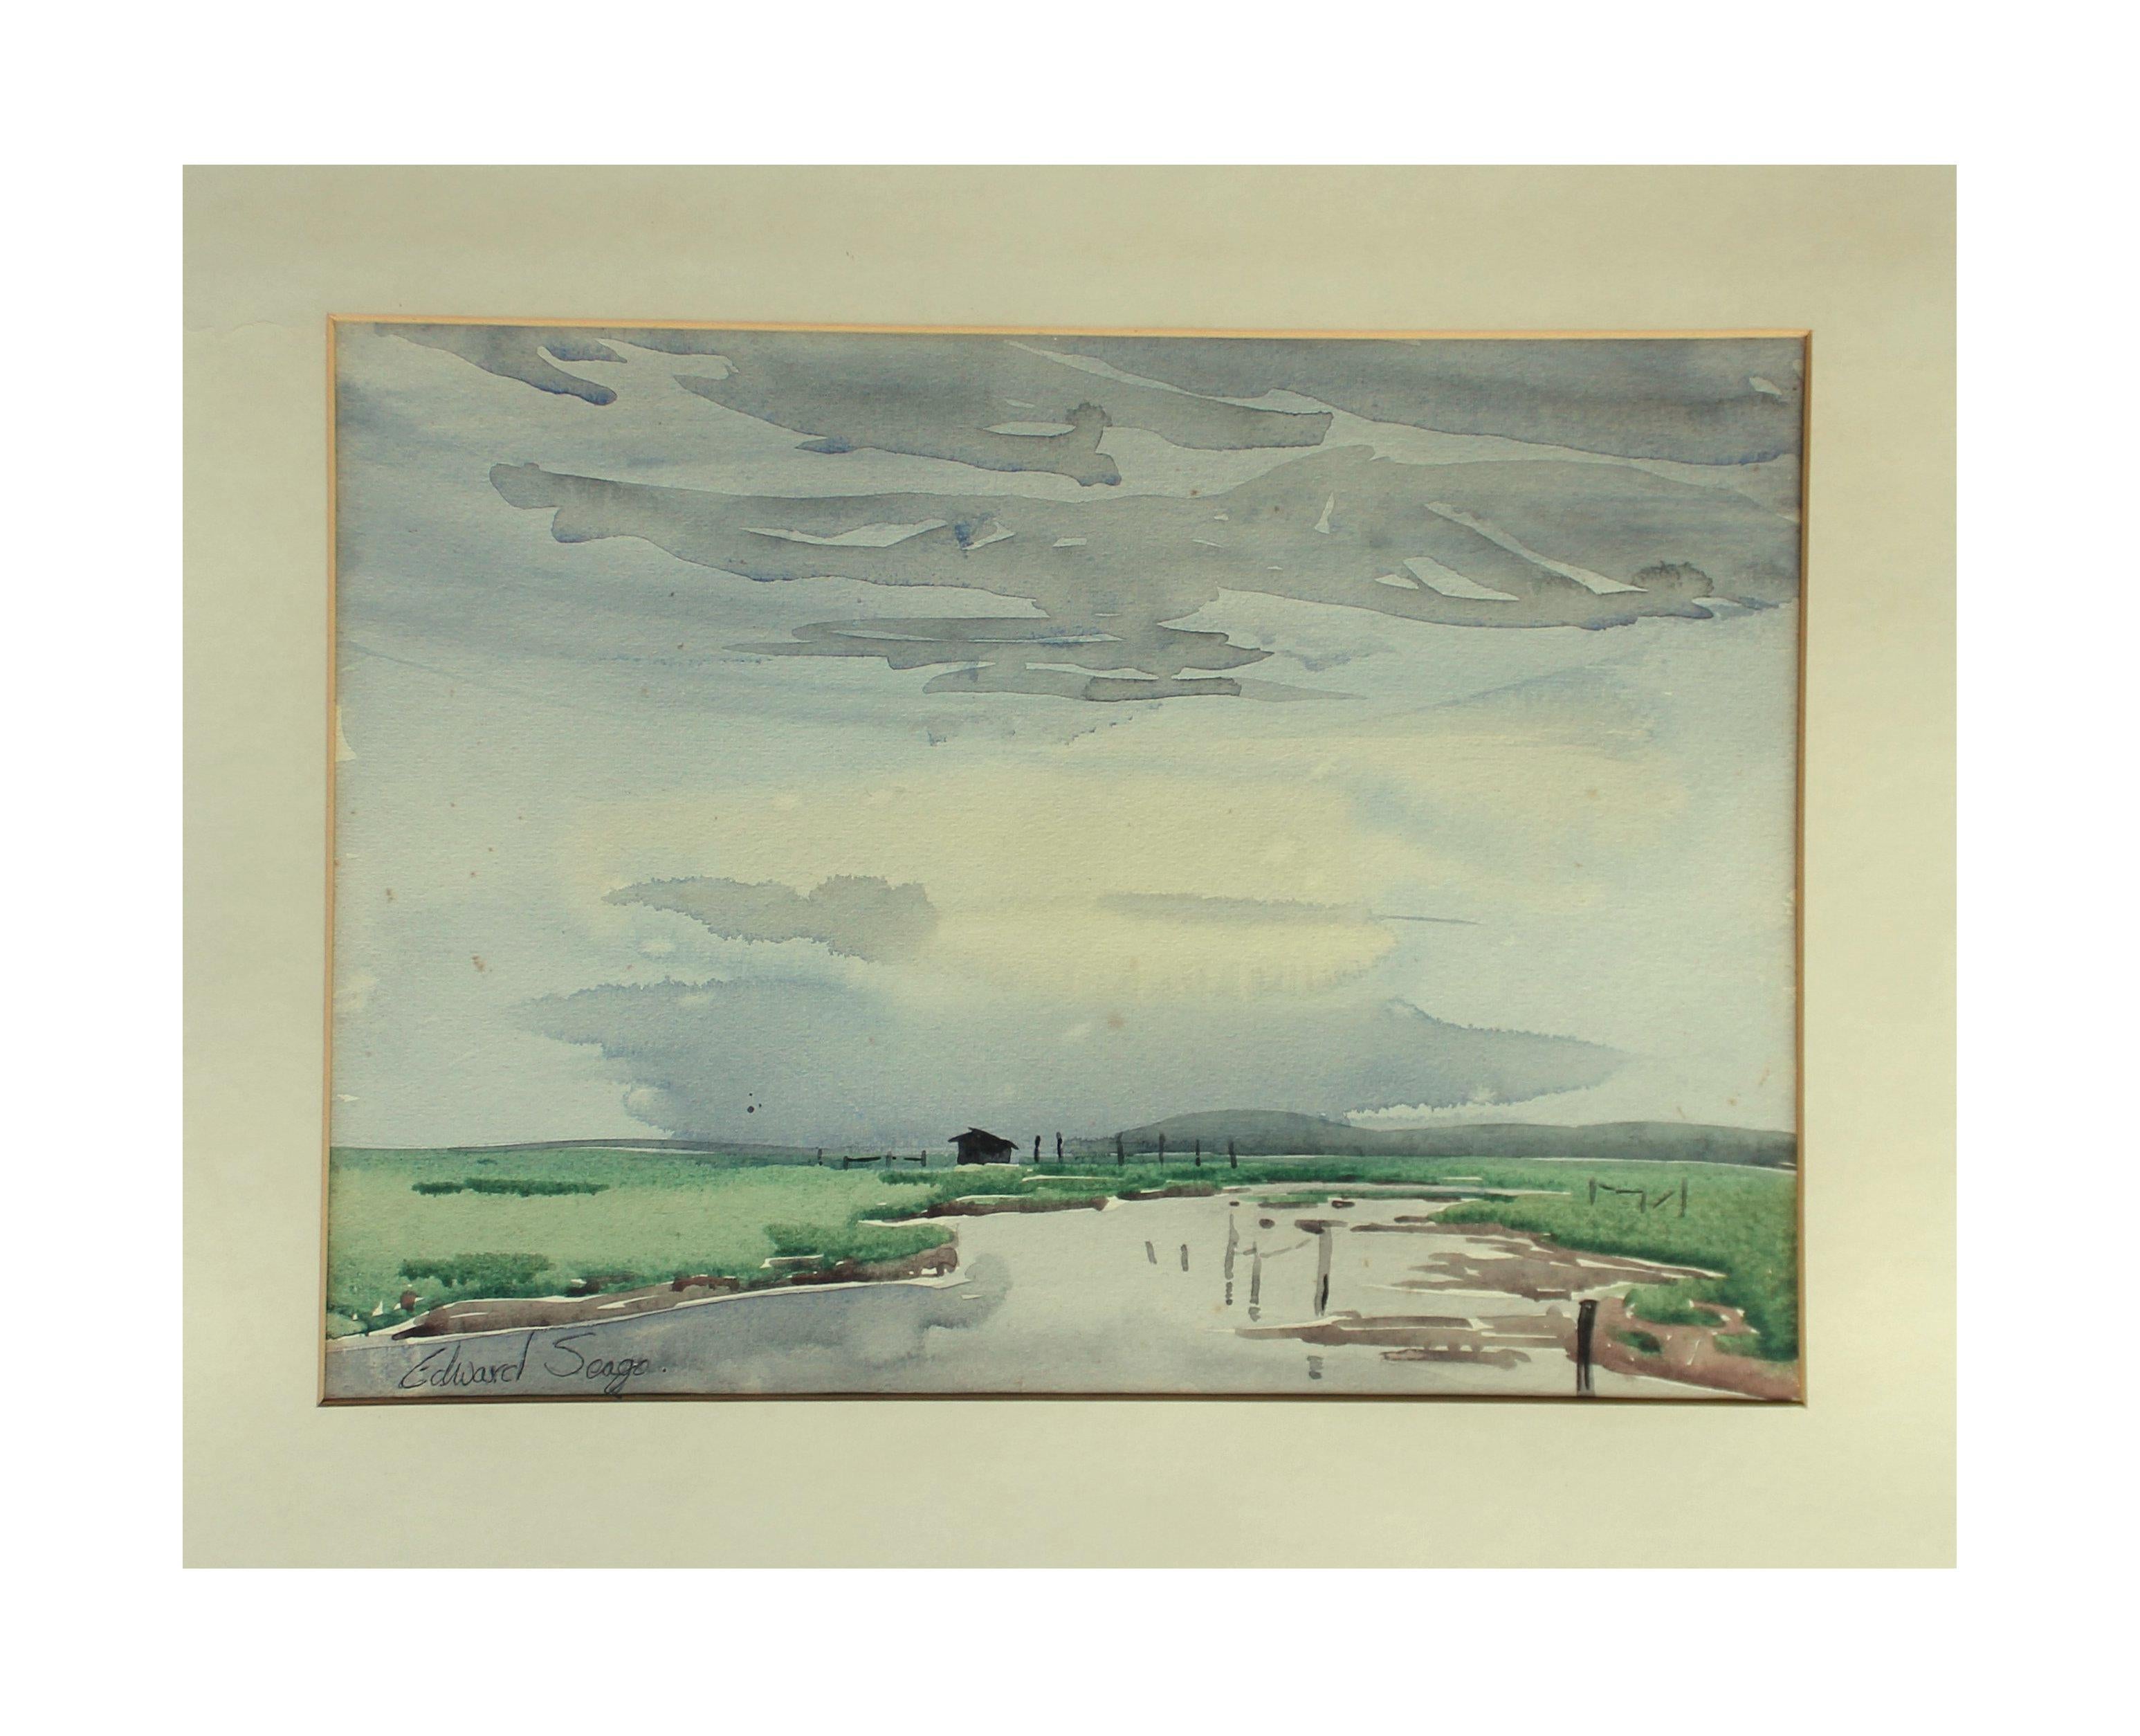 A watercolor by Edward Seago RWS, RBA, (1910-1974).

Signed lower left and in its original painted frame. When taking it out of the frame, it has the recipients details in pencil on the reverse of the paper.

Measures: 37 cm wide x 27 cm high